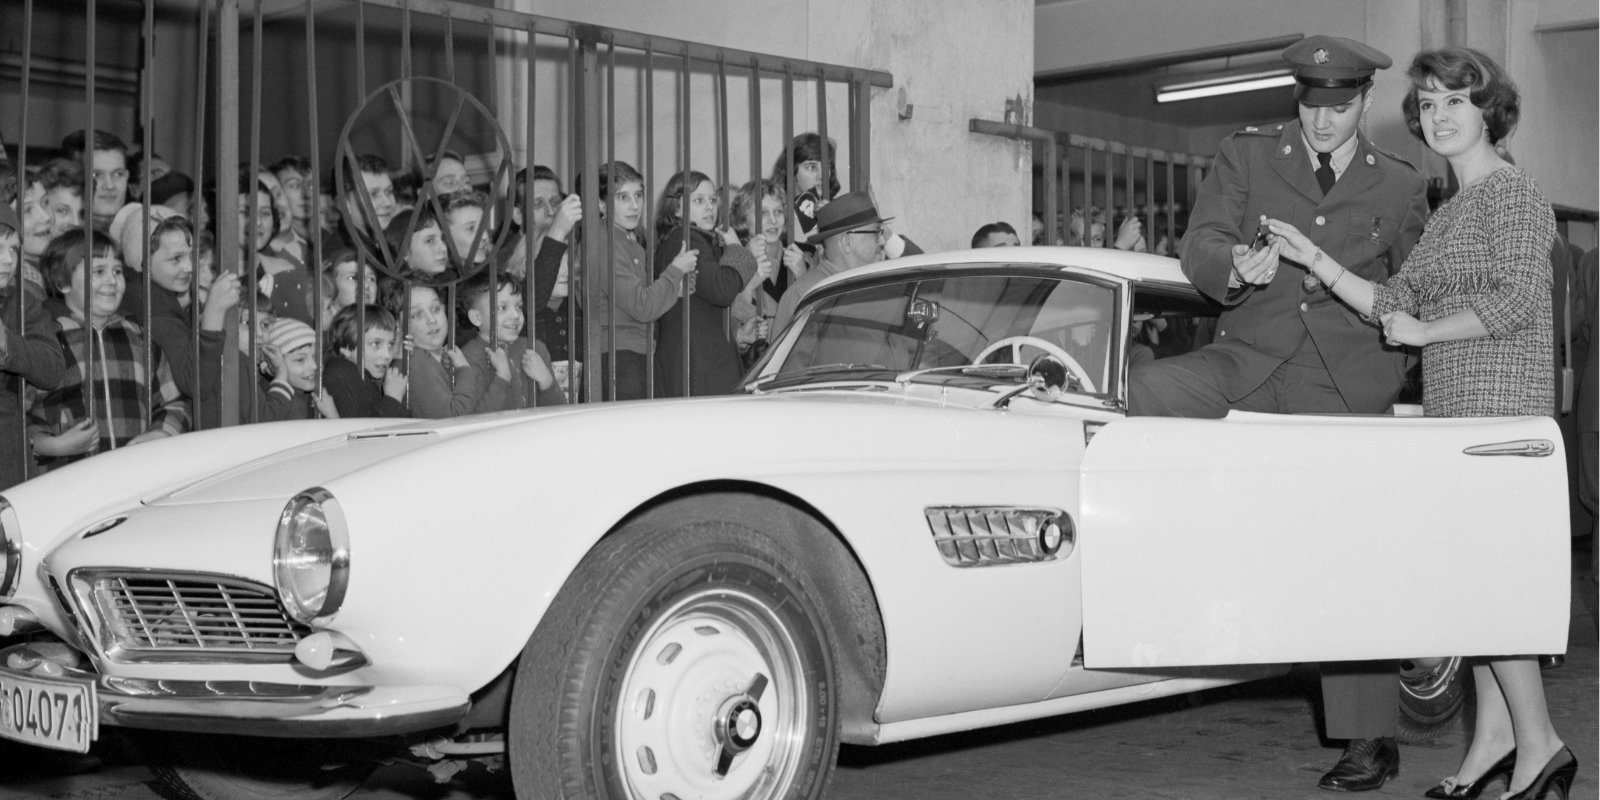 Elvis Presley poses with his white BMW in Germany.